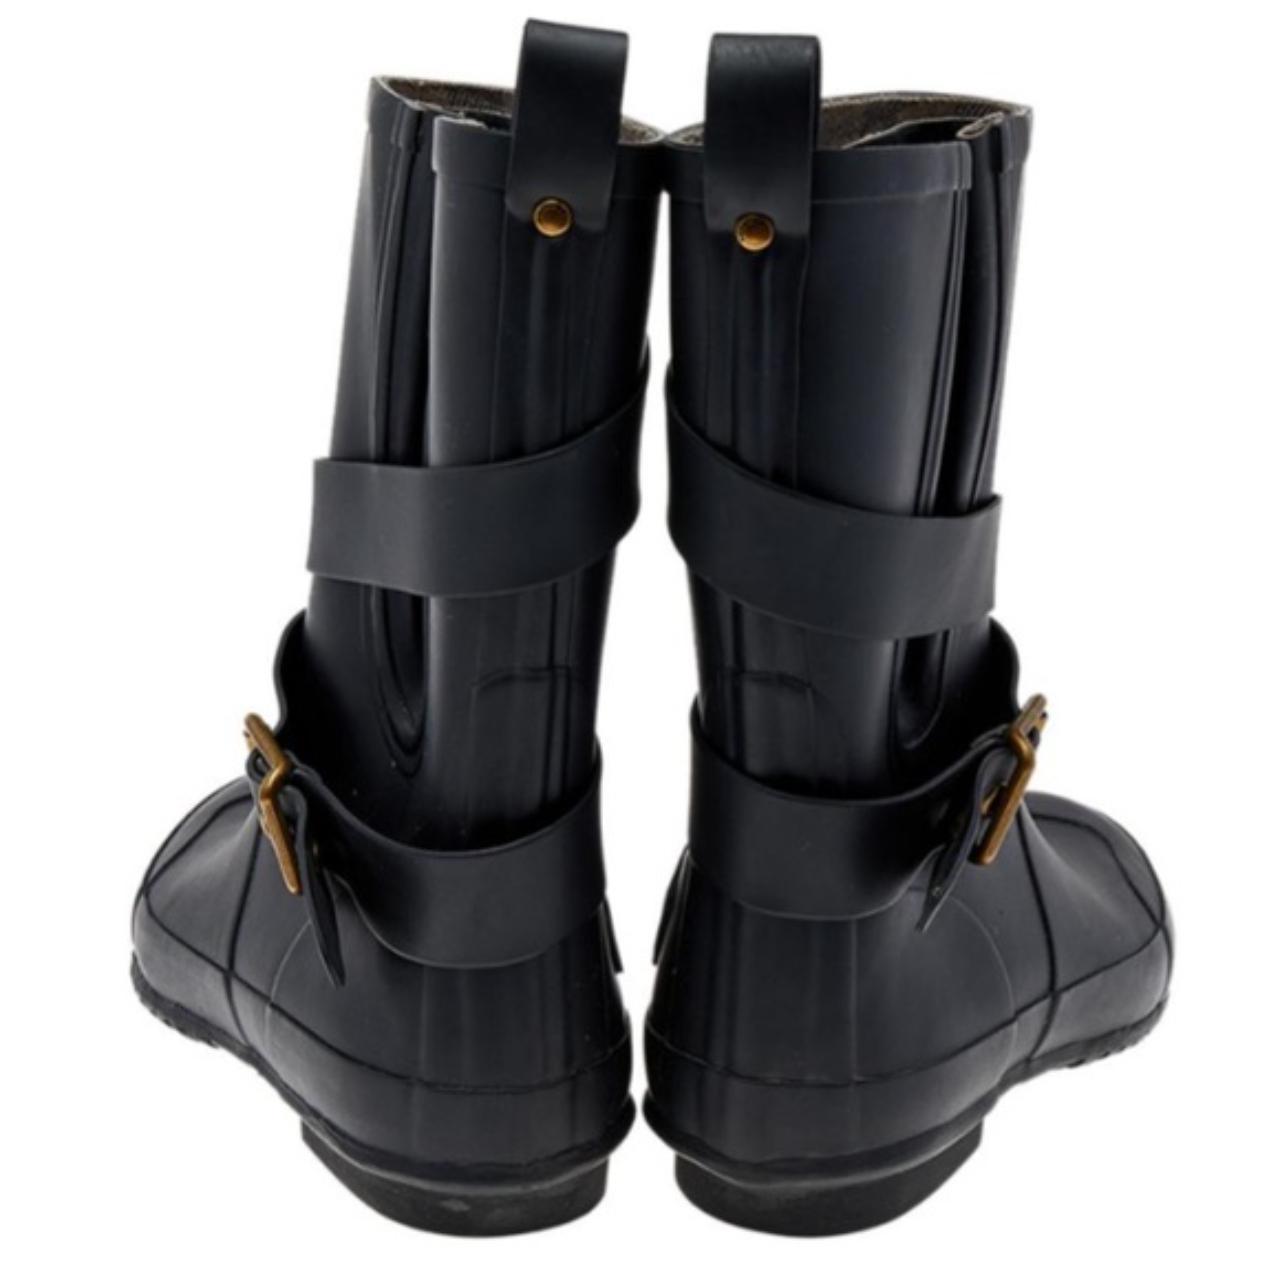 Burberry Black/Check Print Inside Rubber Buckle Rain Boots/Booties